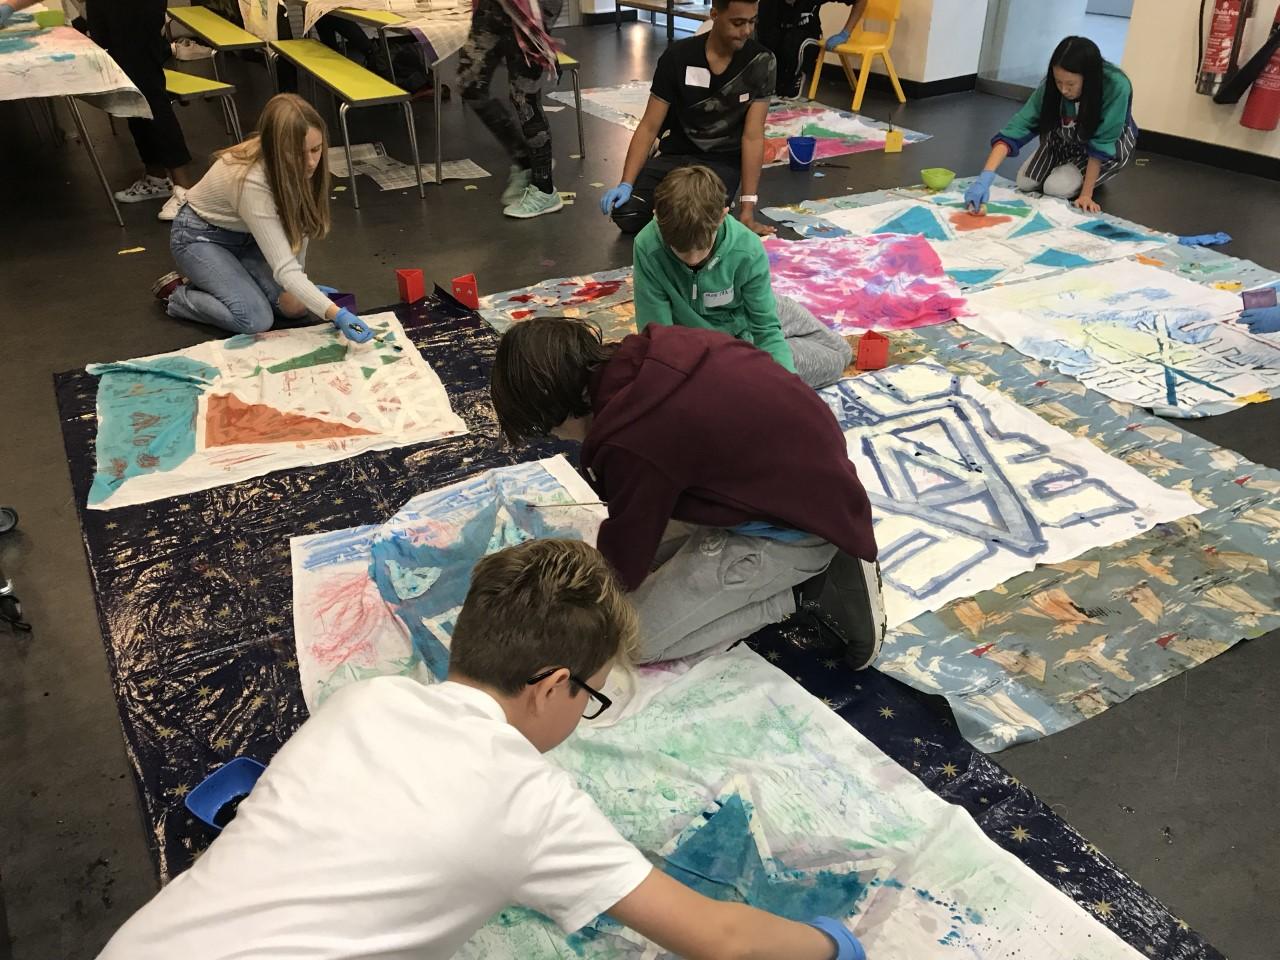 A group of young people on the floor painting onto fabric